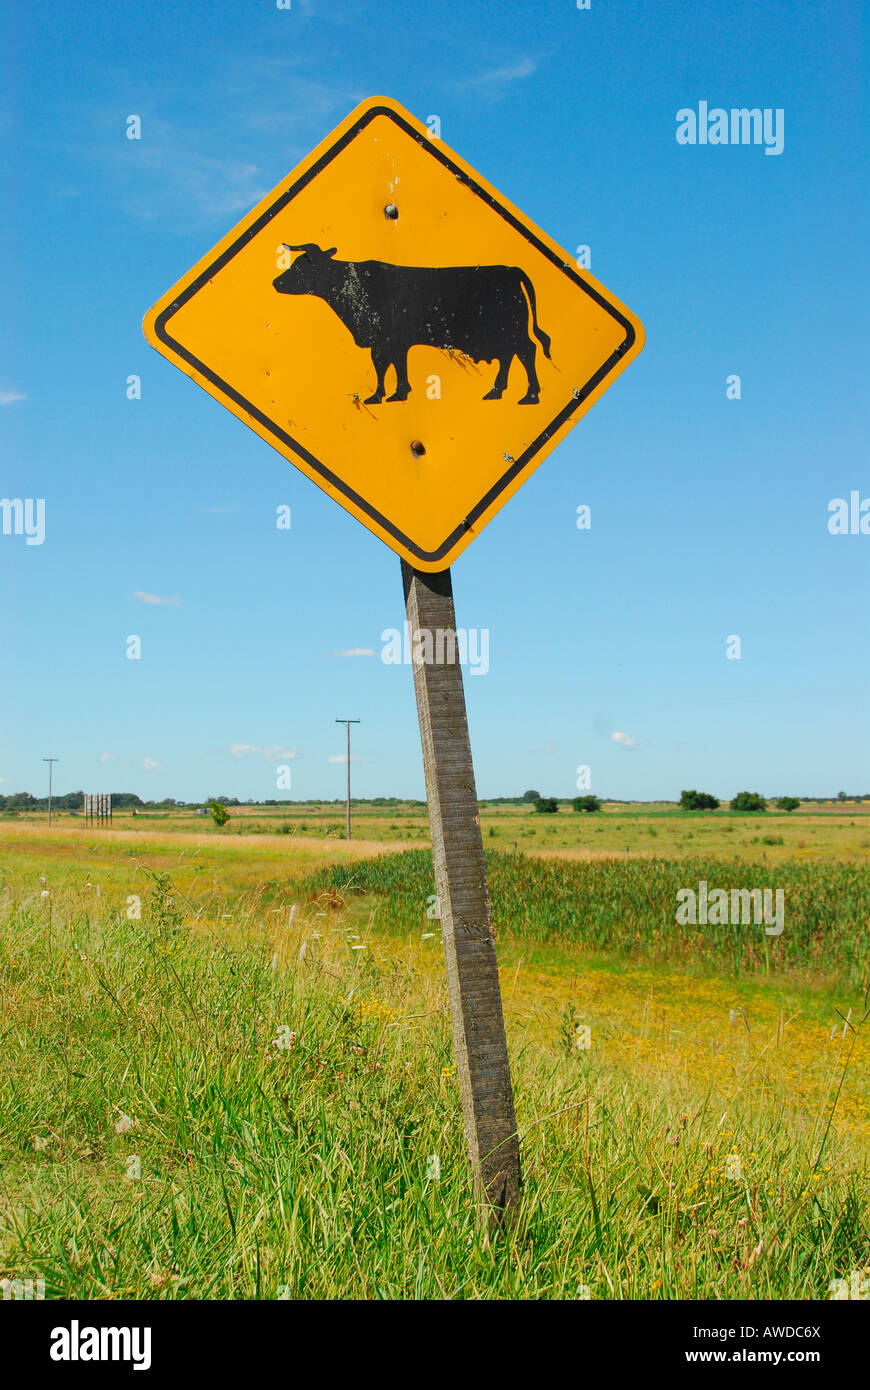 Beware of cows: street sign, near Dolores, Buenos Aires province, Argentina Stock Photo